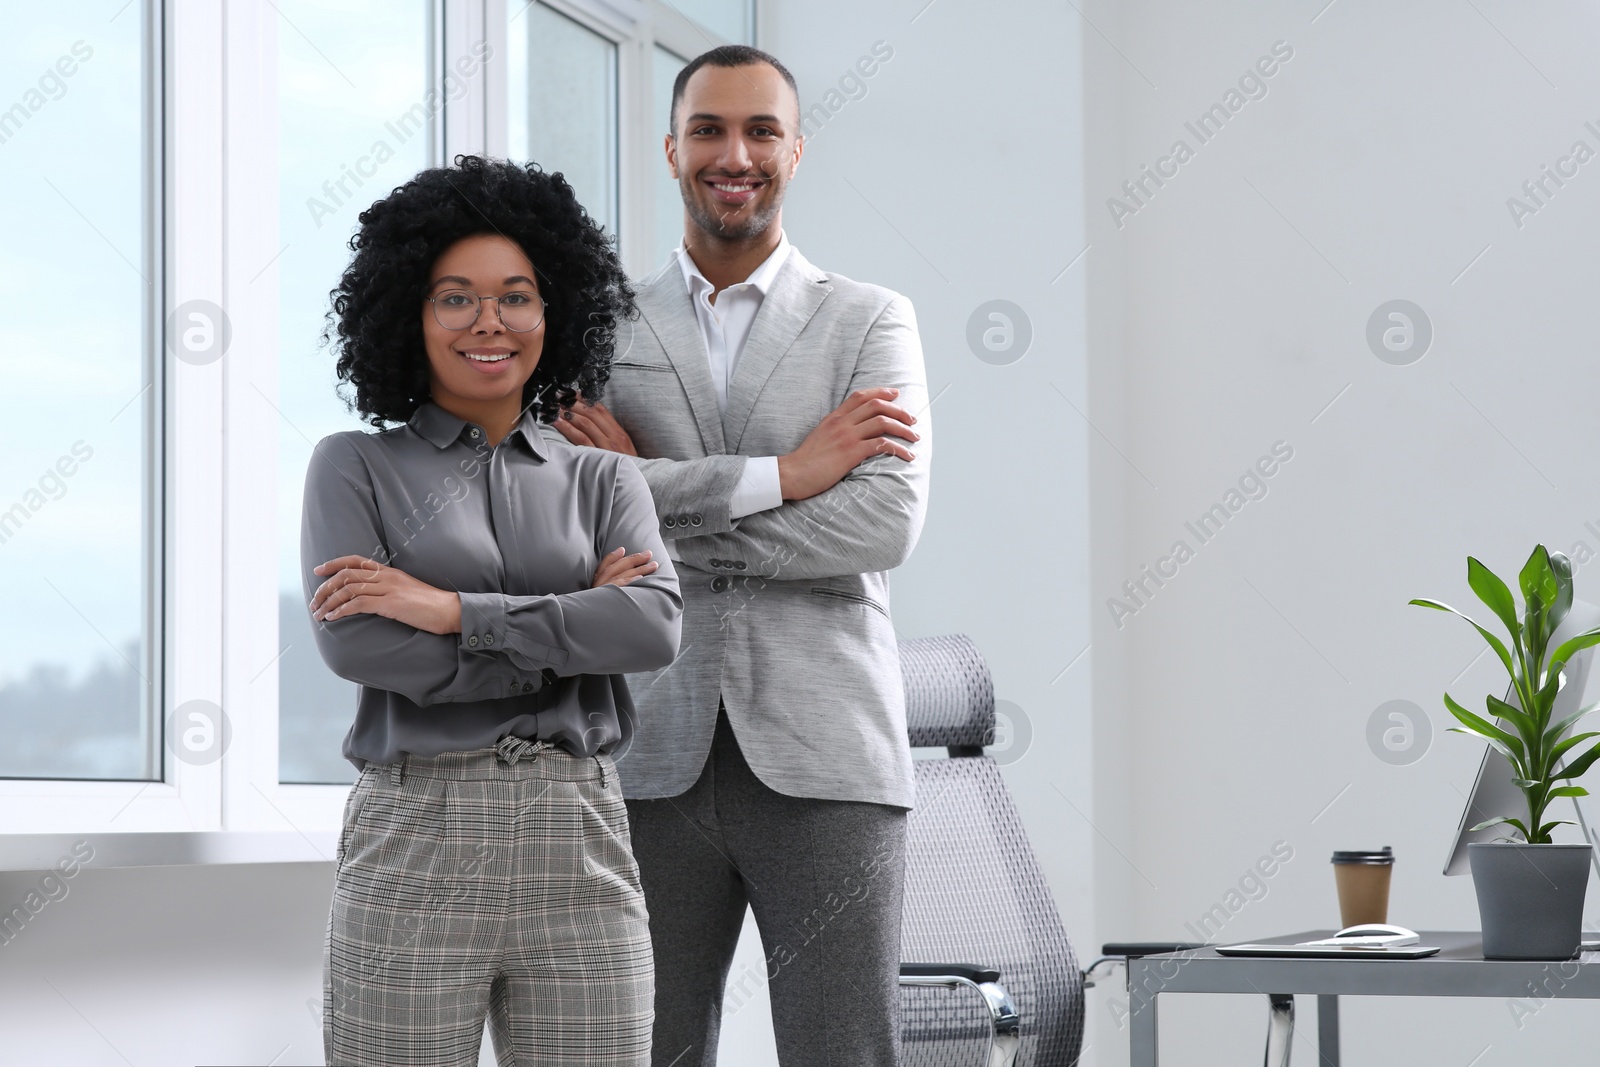 Photo of Young smiling colleagues near window in modern office